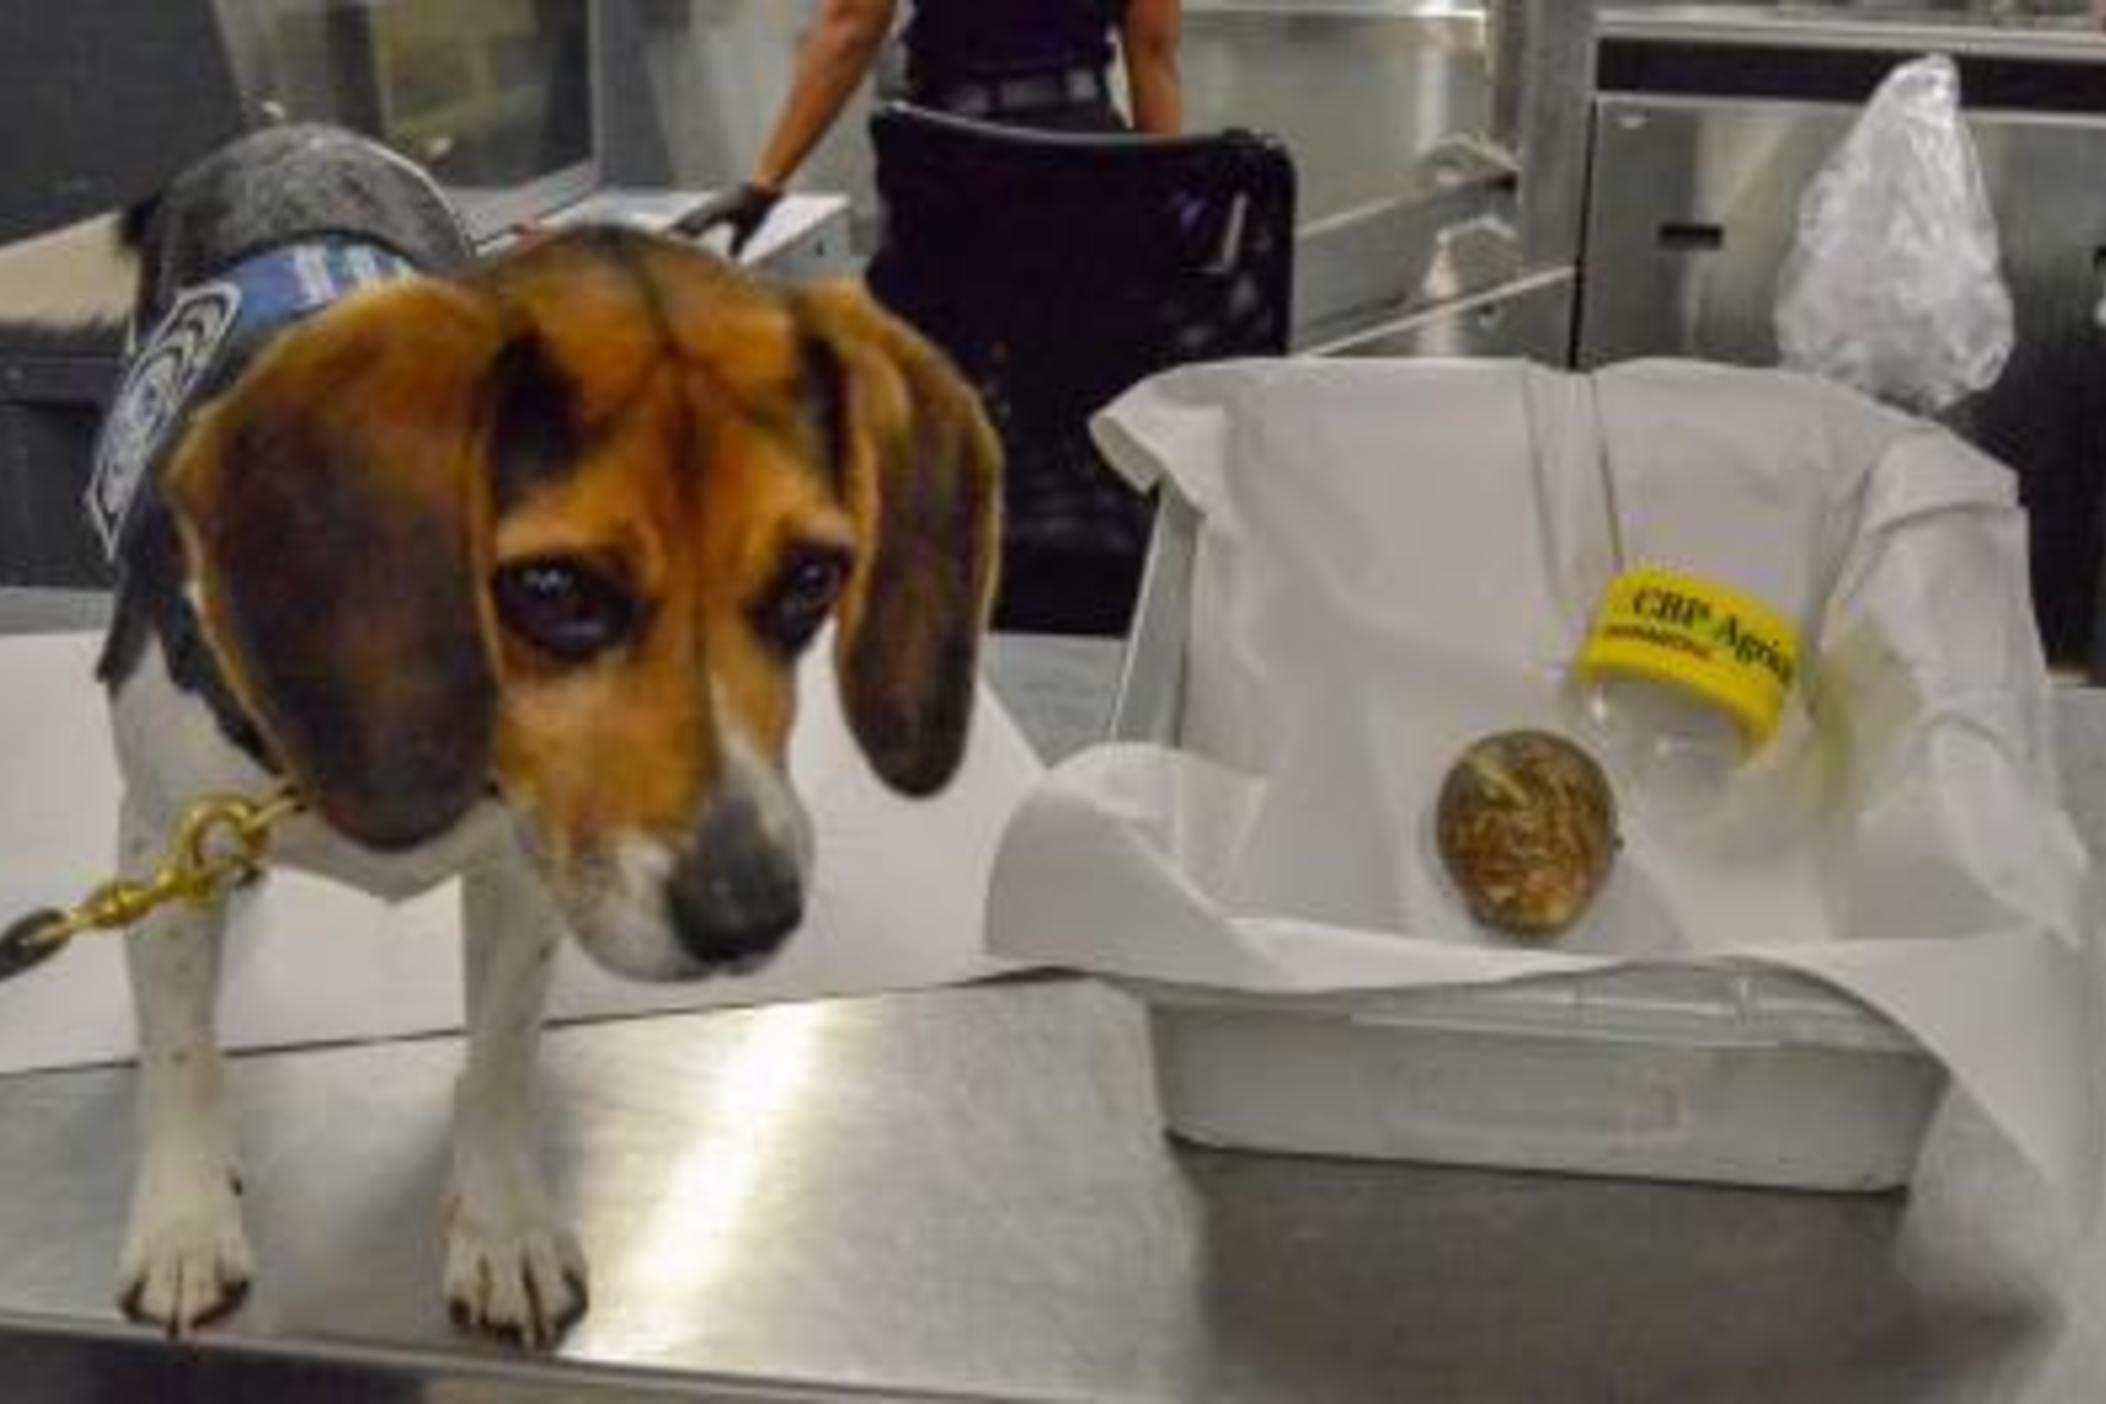 CBP Beagle “MOX” alerted to a Giant African Snail in a passenger’s bag after arriving at ATL Airport